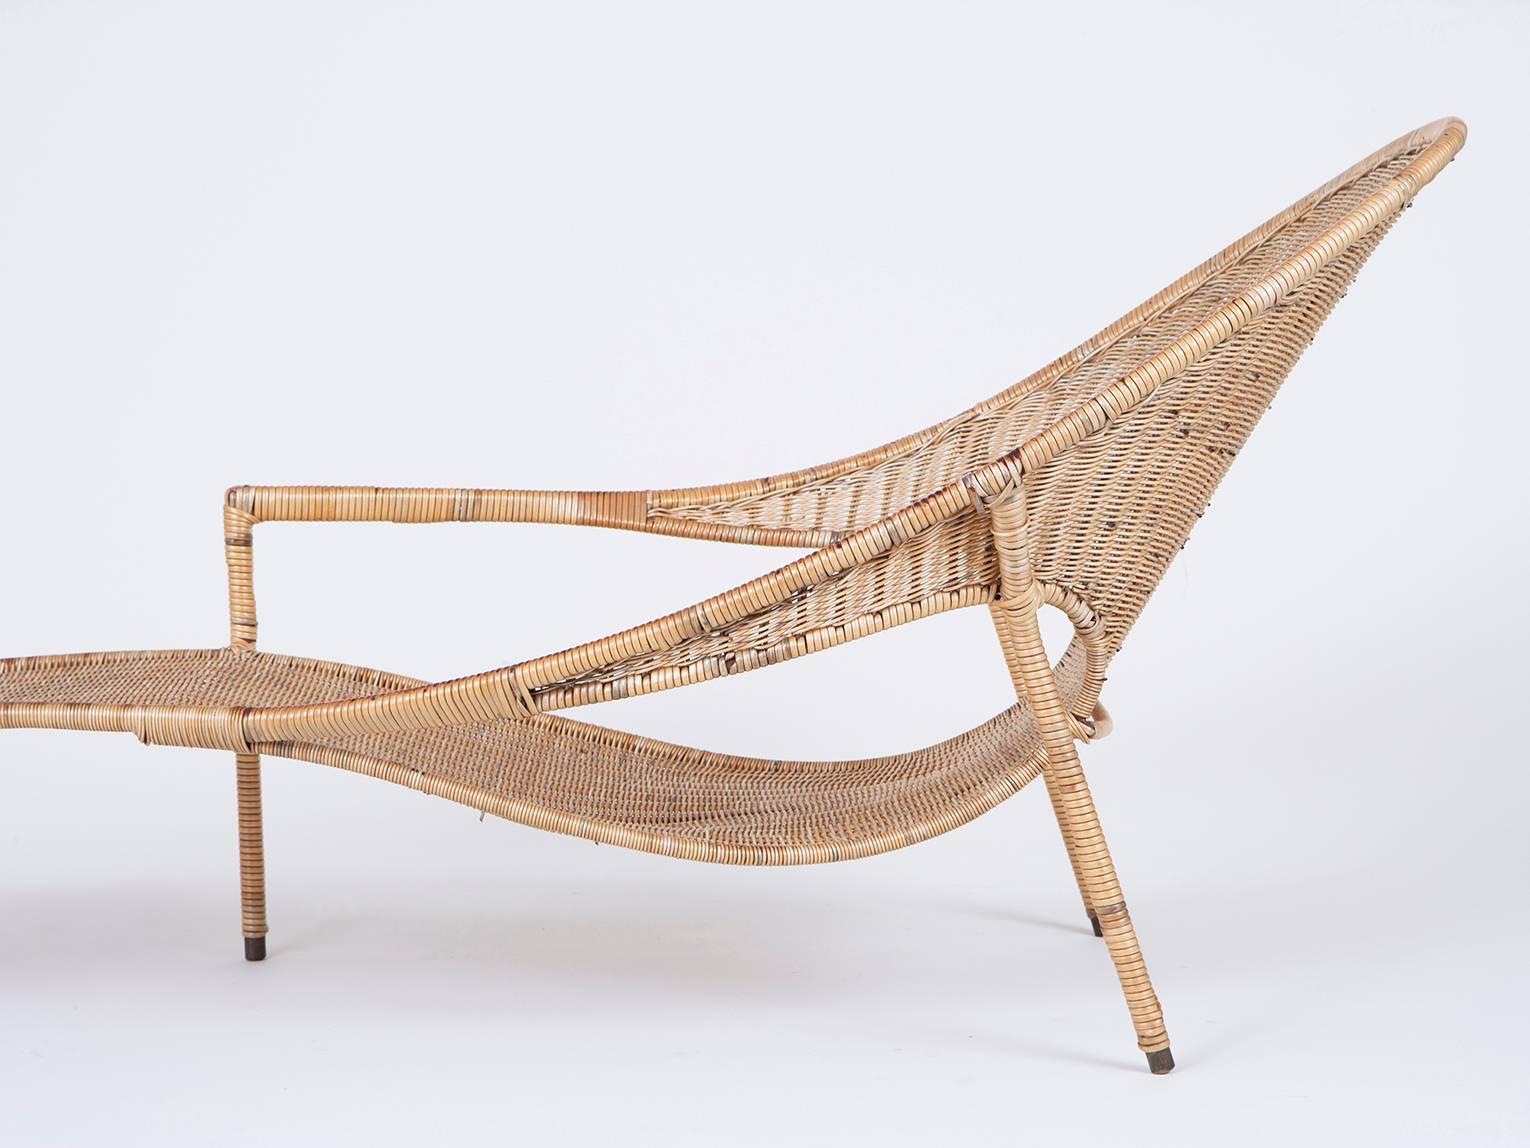 Asymmetric and sculptural lounge chair of plasticized wicker over galvanized iron with brass feet, by California designer Francis Mair.